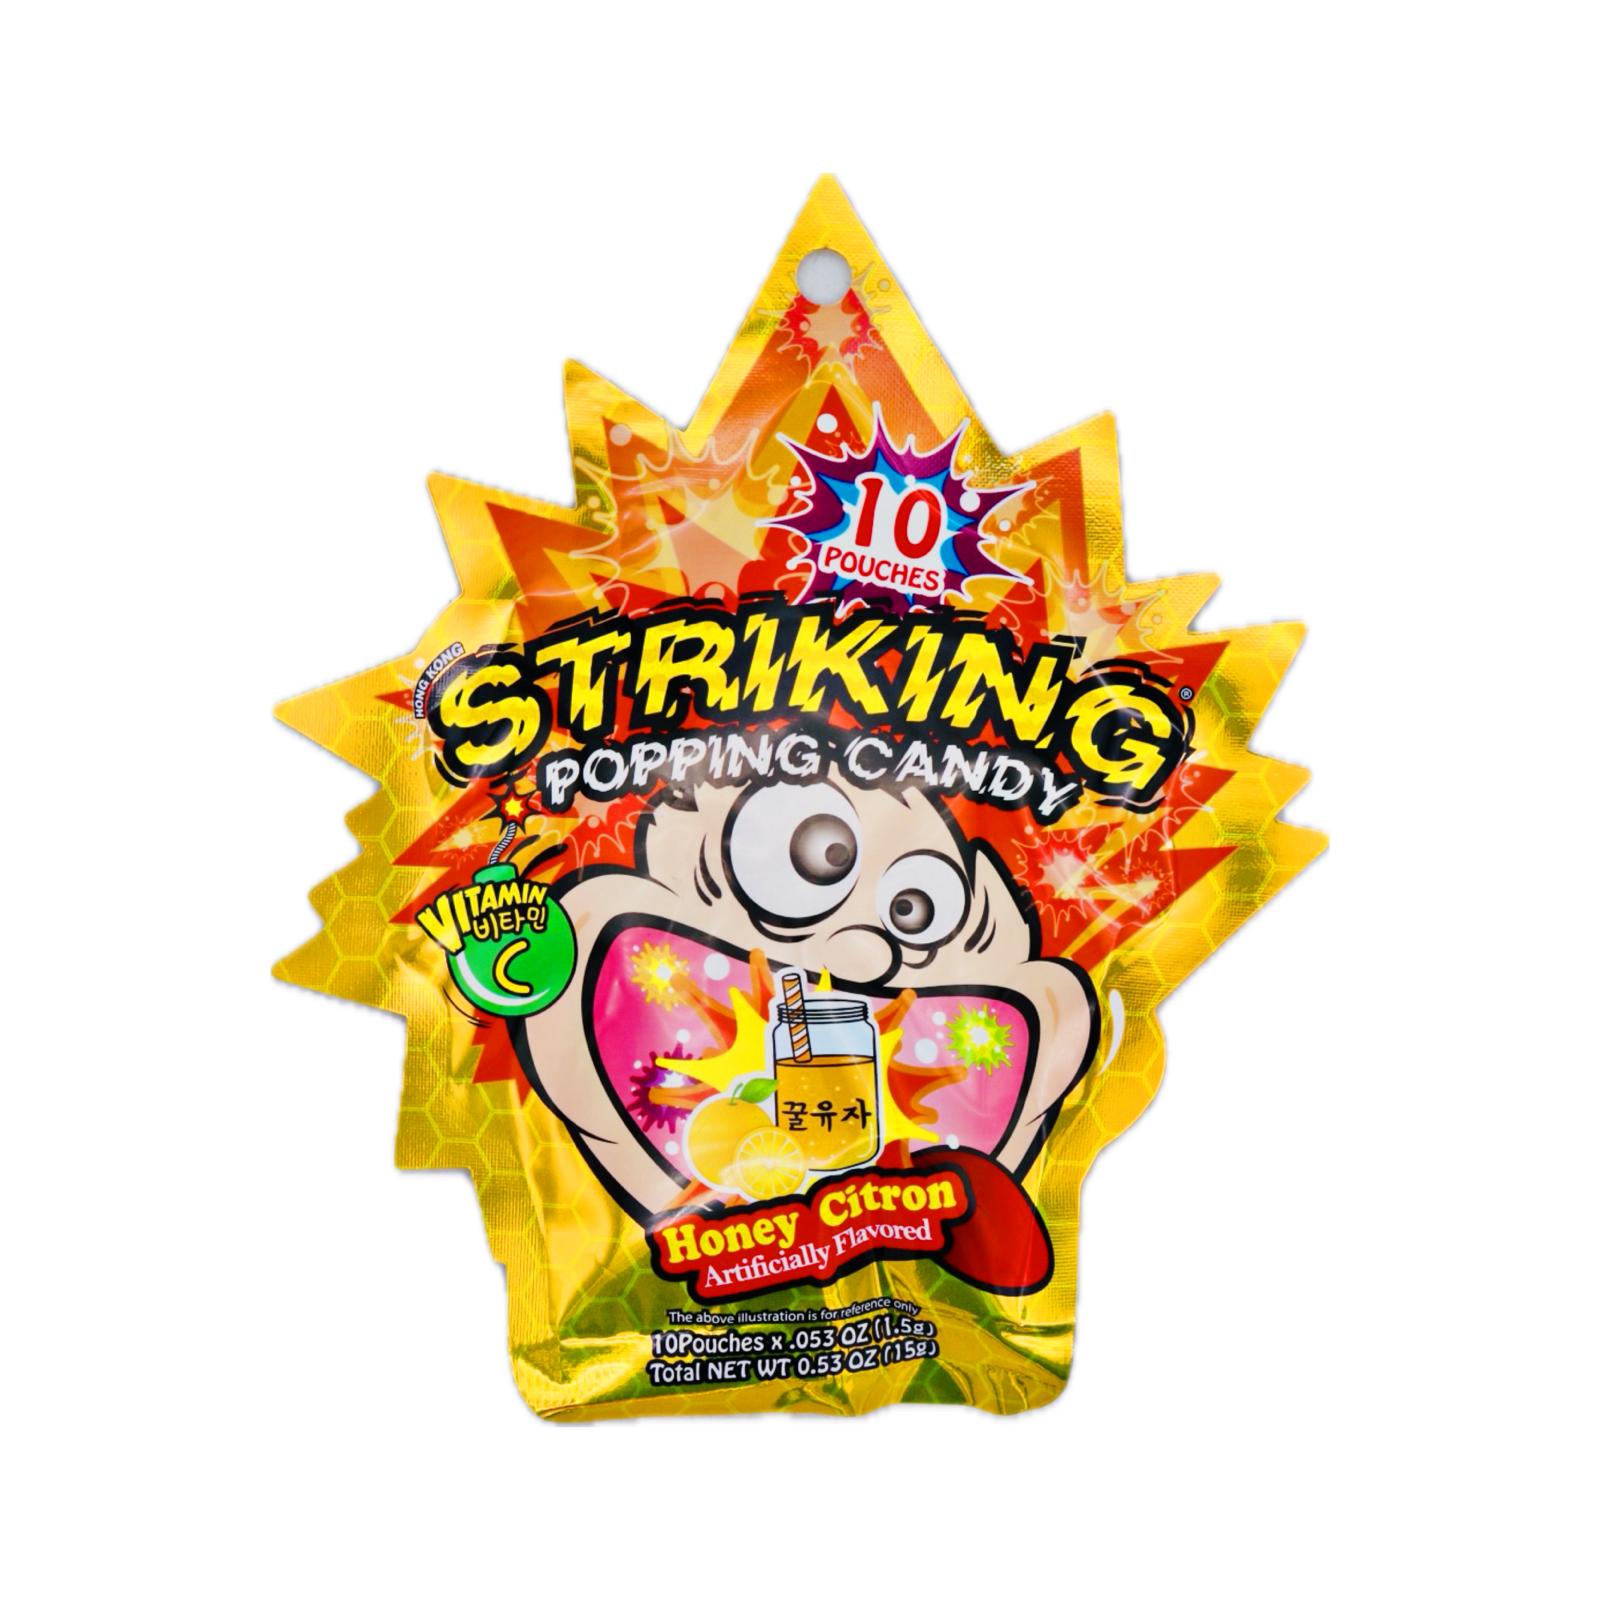 Striking Popping Candy - Honey Citron Flavour with Vitamin C 15g